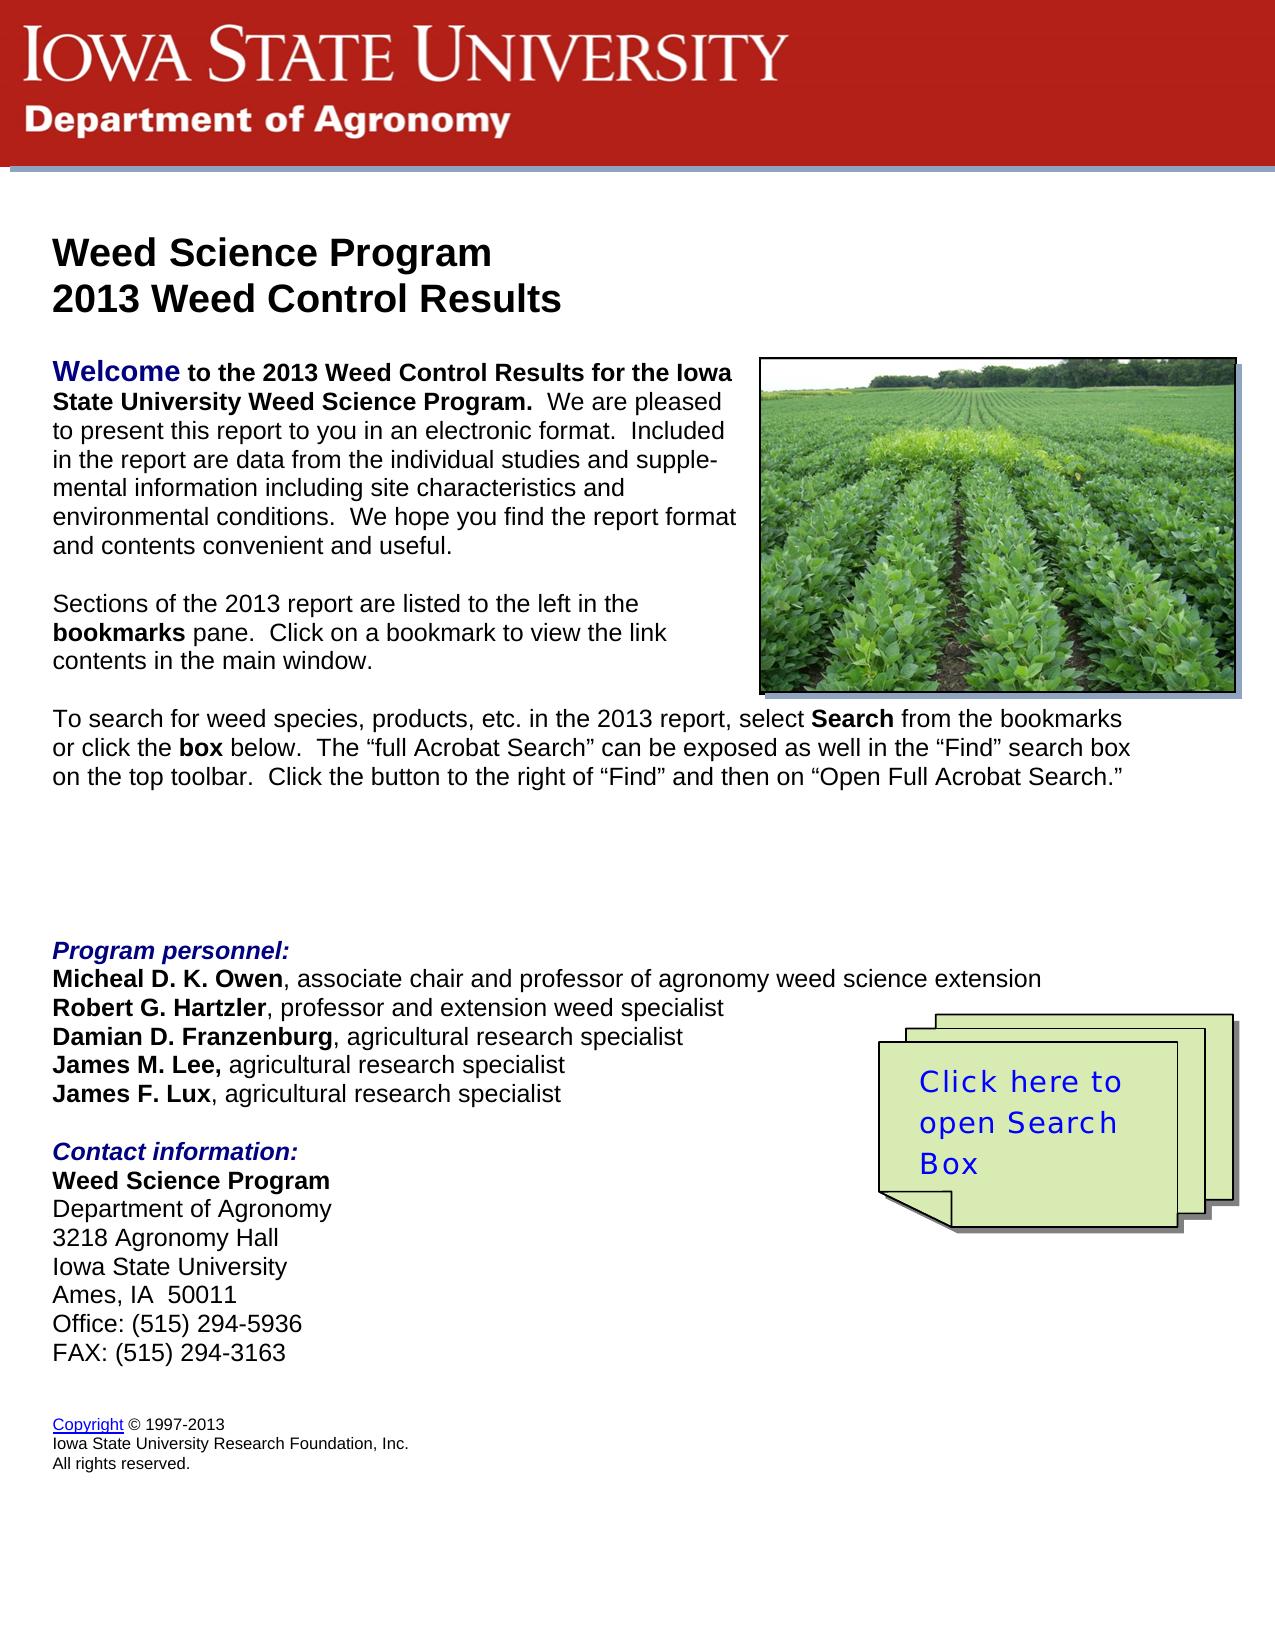 Iowa State University Weed Science Program - Weed Control Results